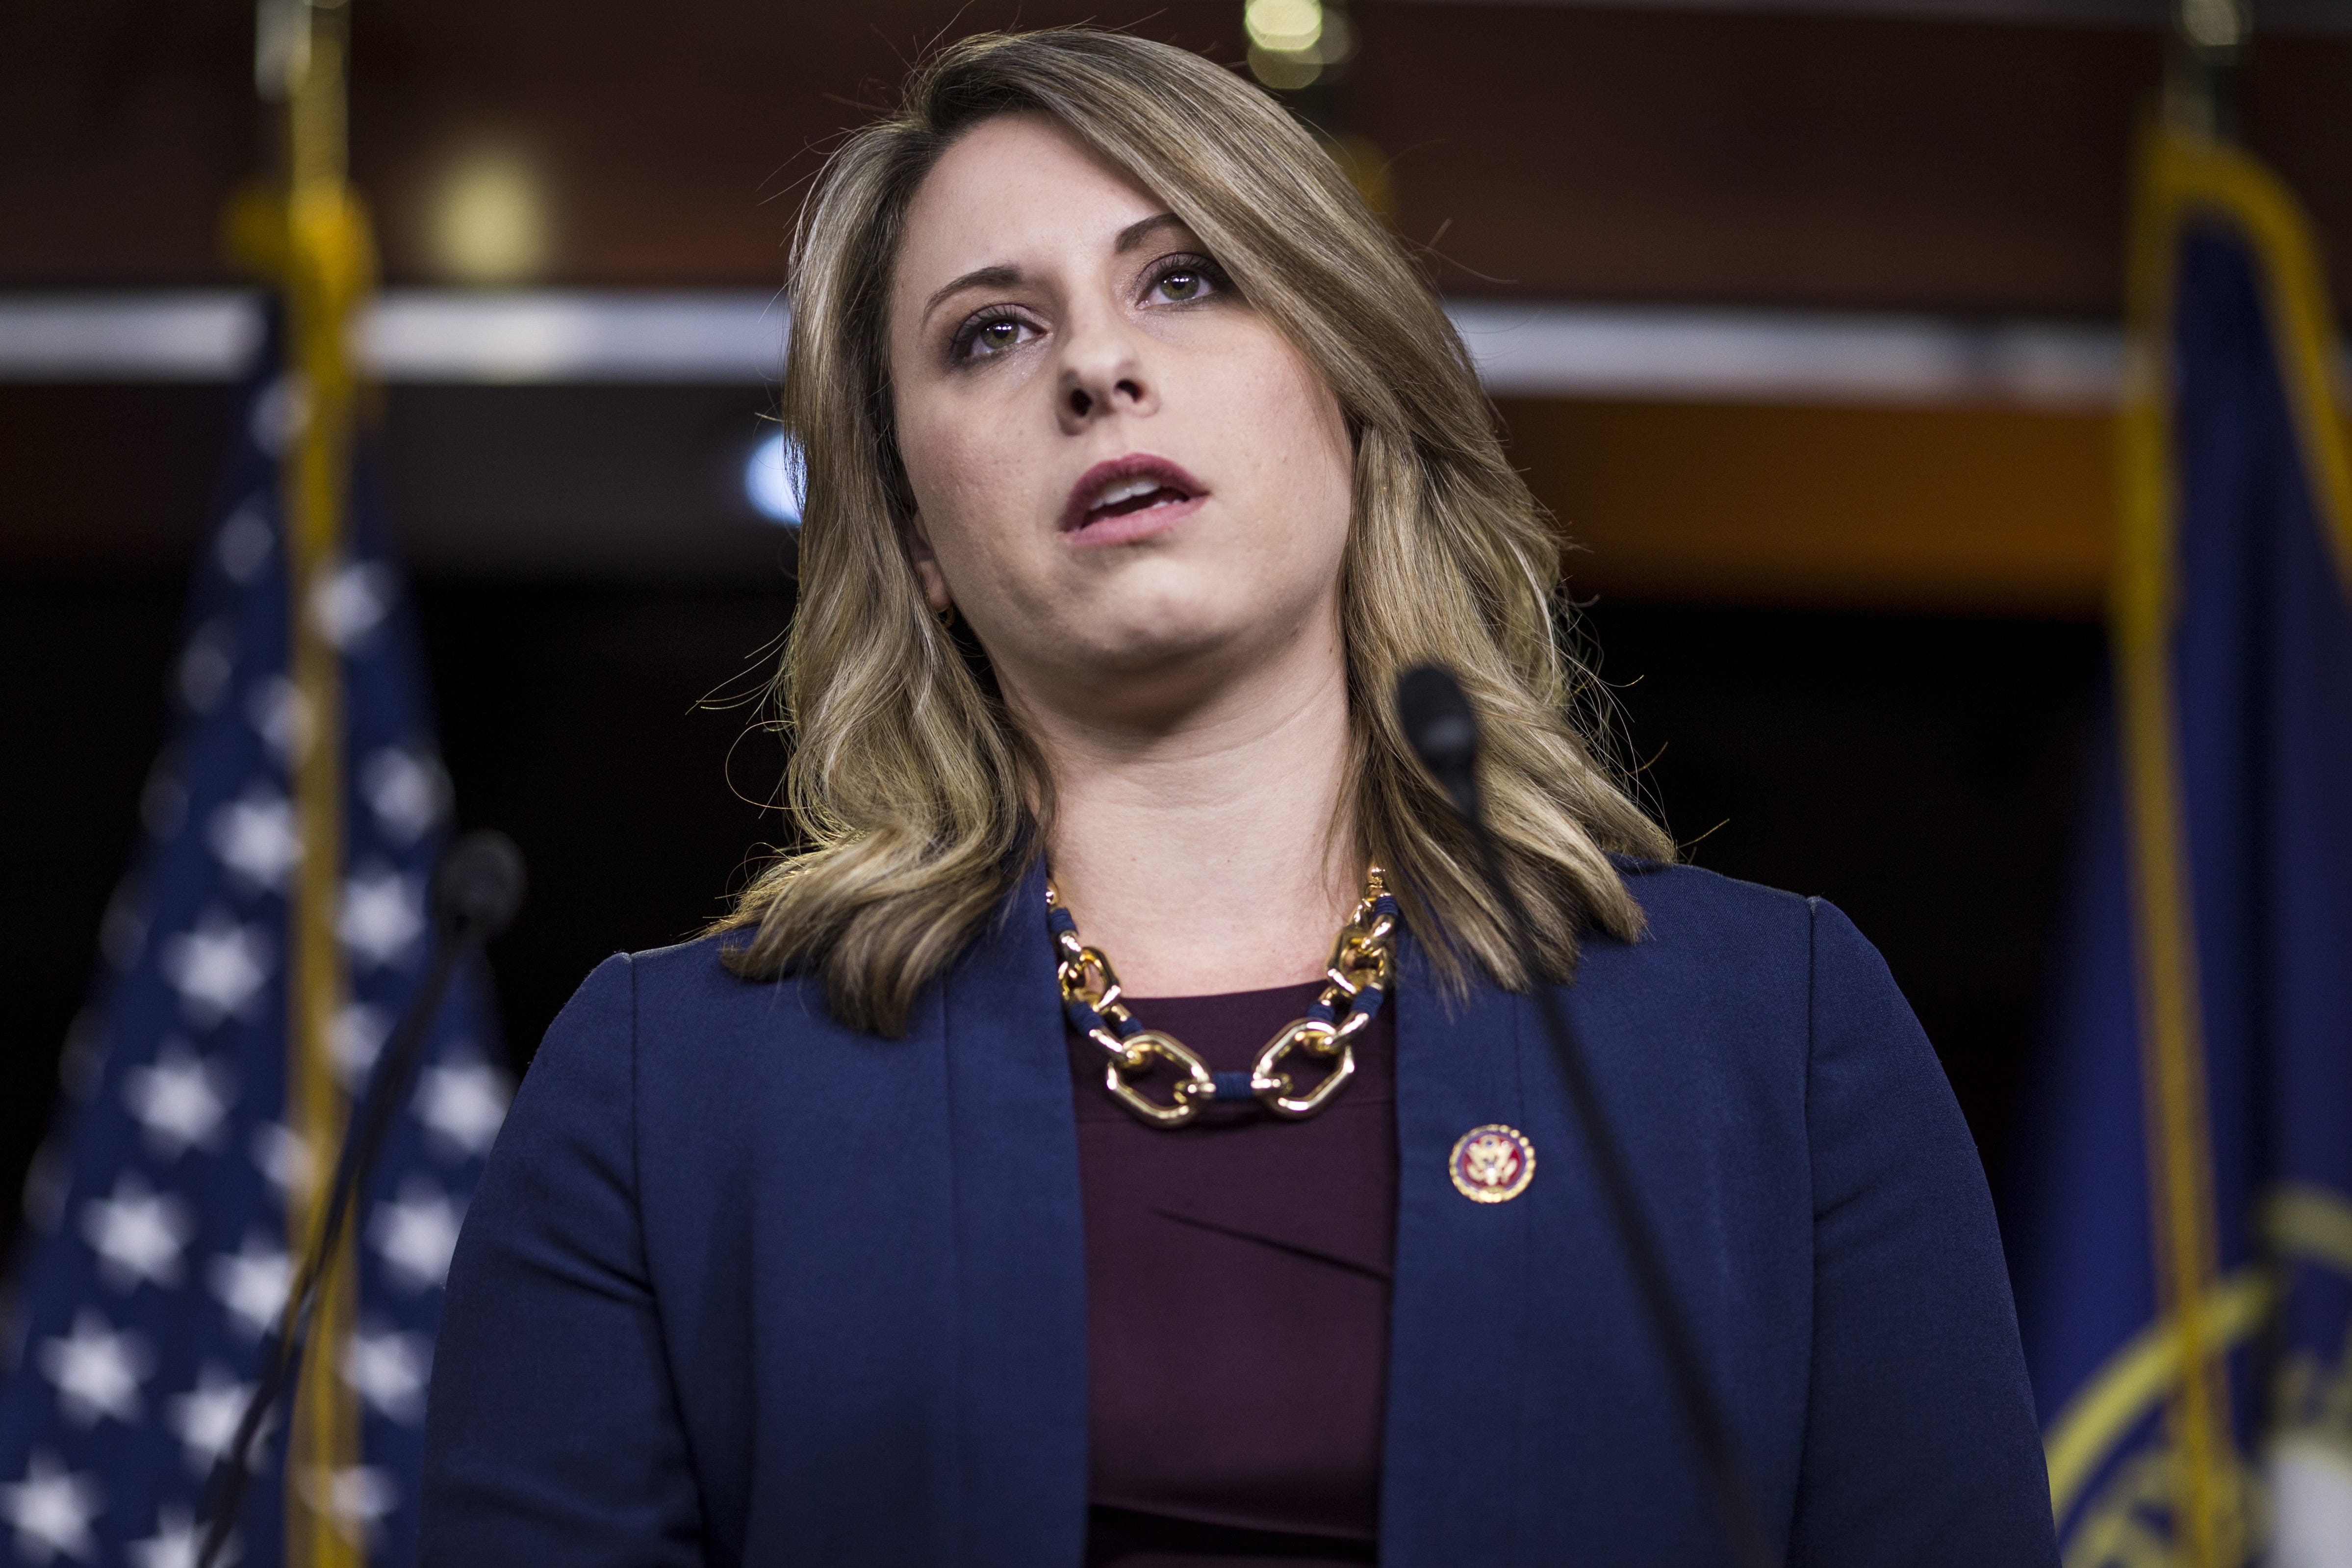 Having An Affair Porn - Katie Hill resigns after nude photos. That reveals double ...